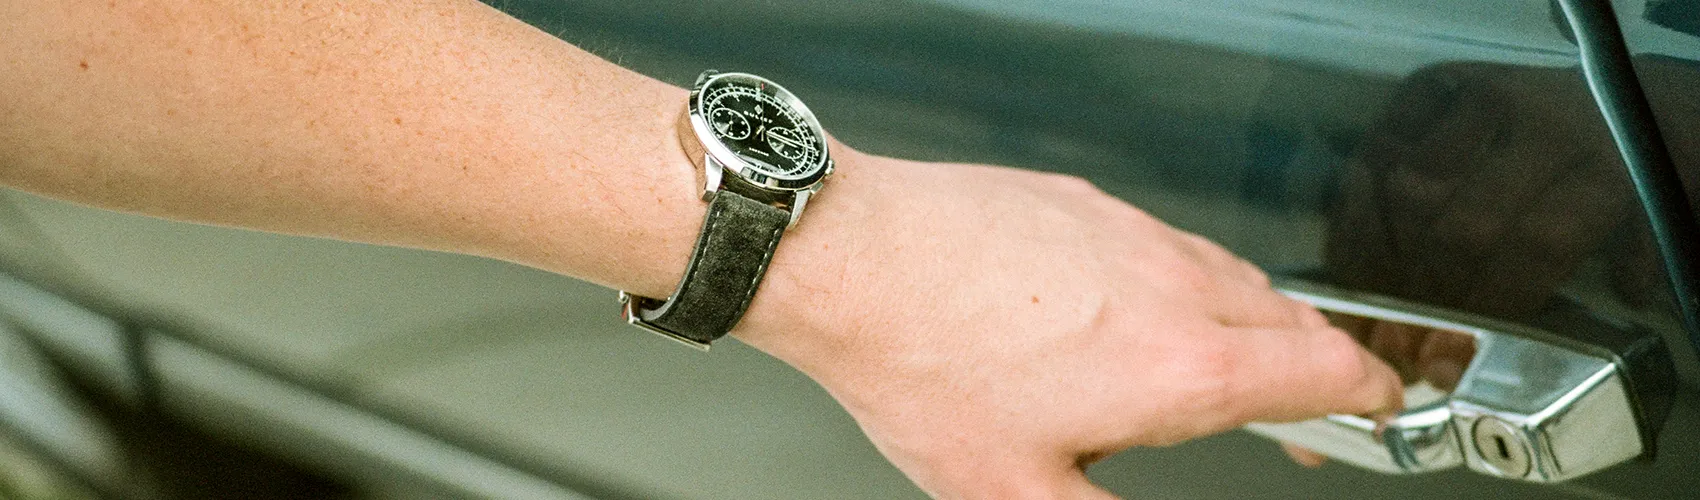 Life style image of a watch